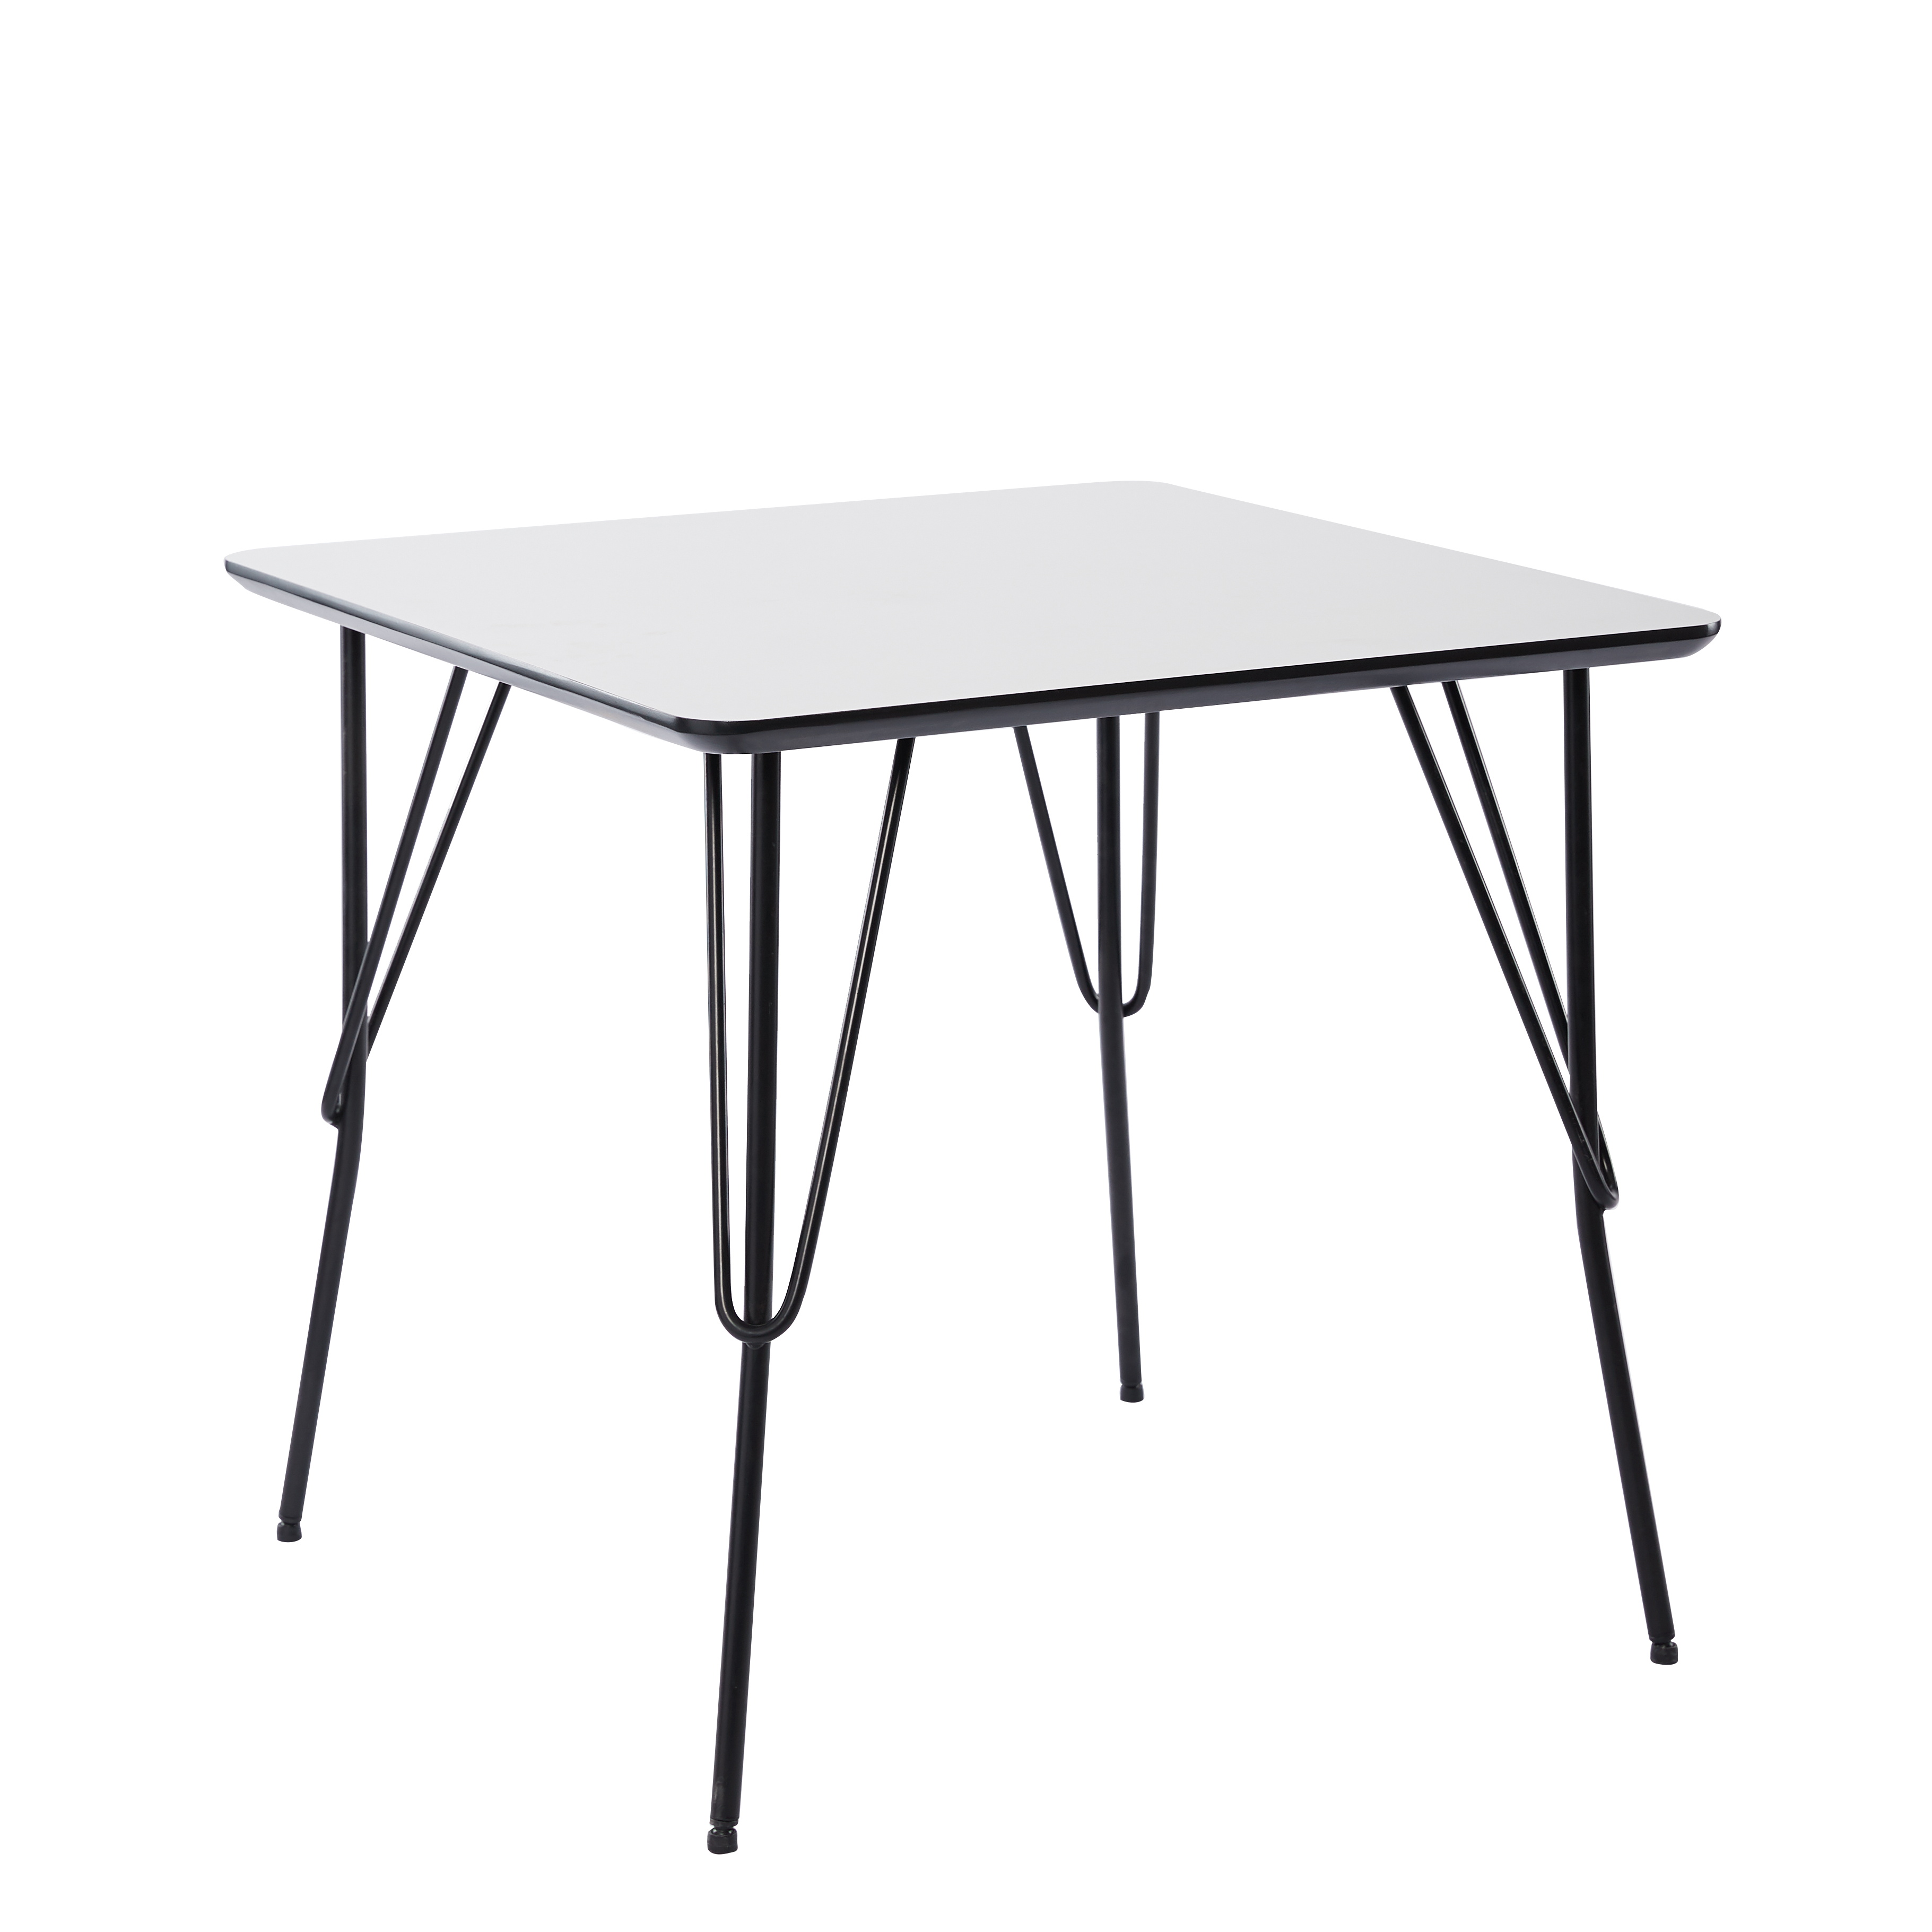 Scandinavian style table with metal legs